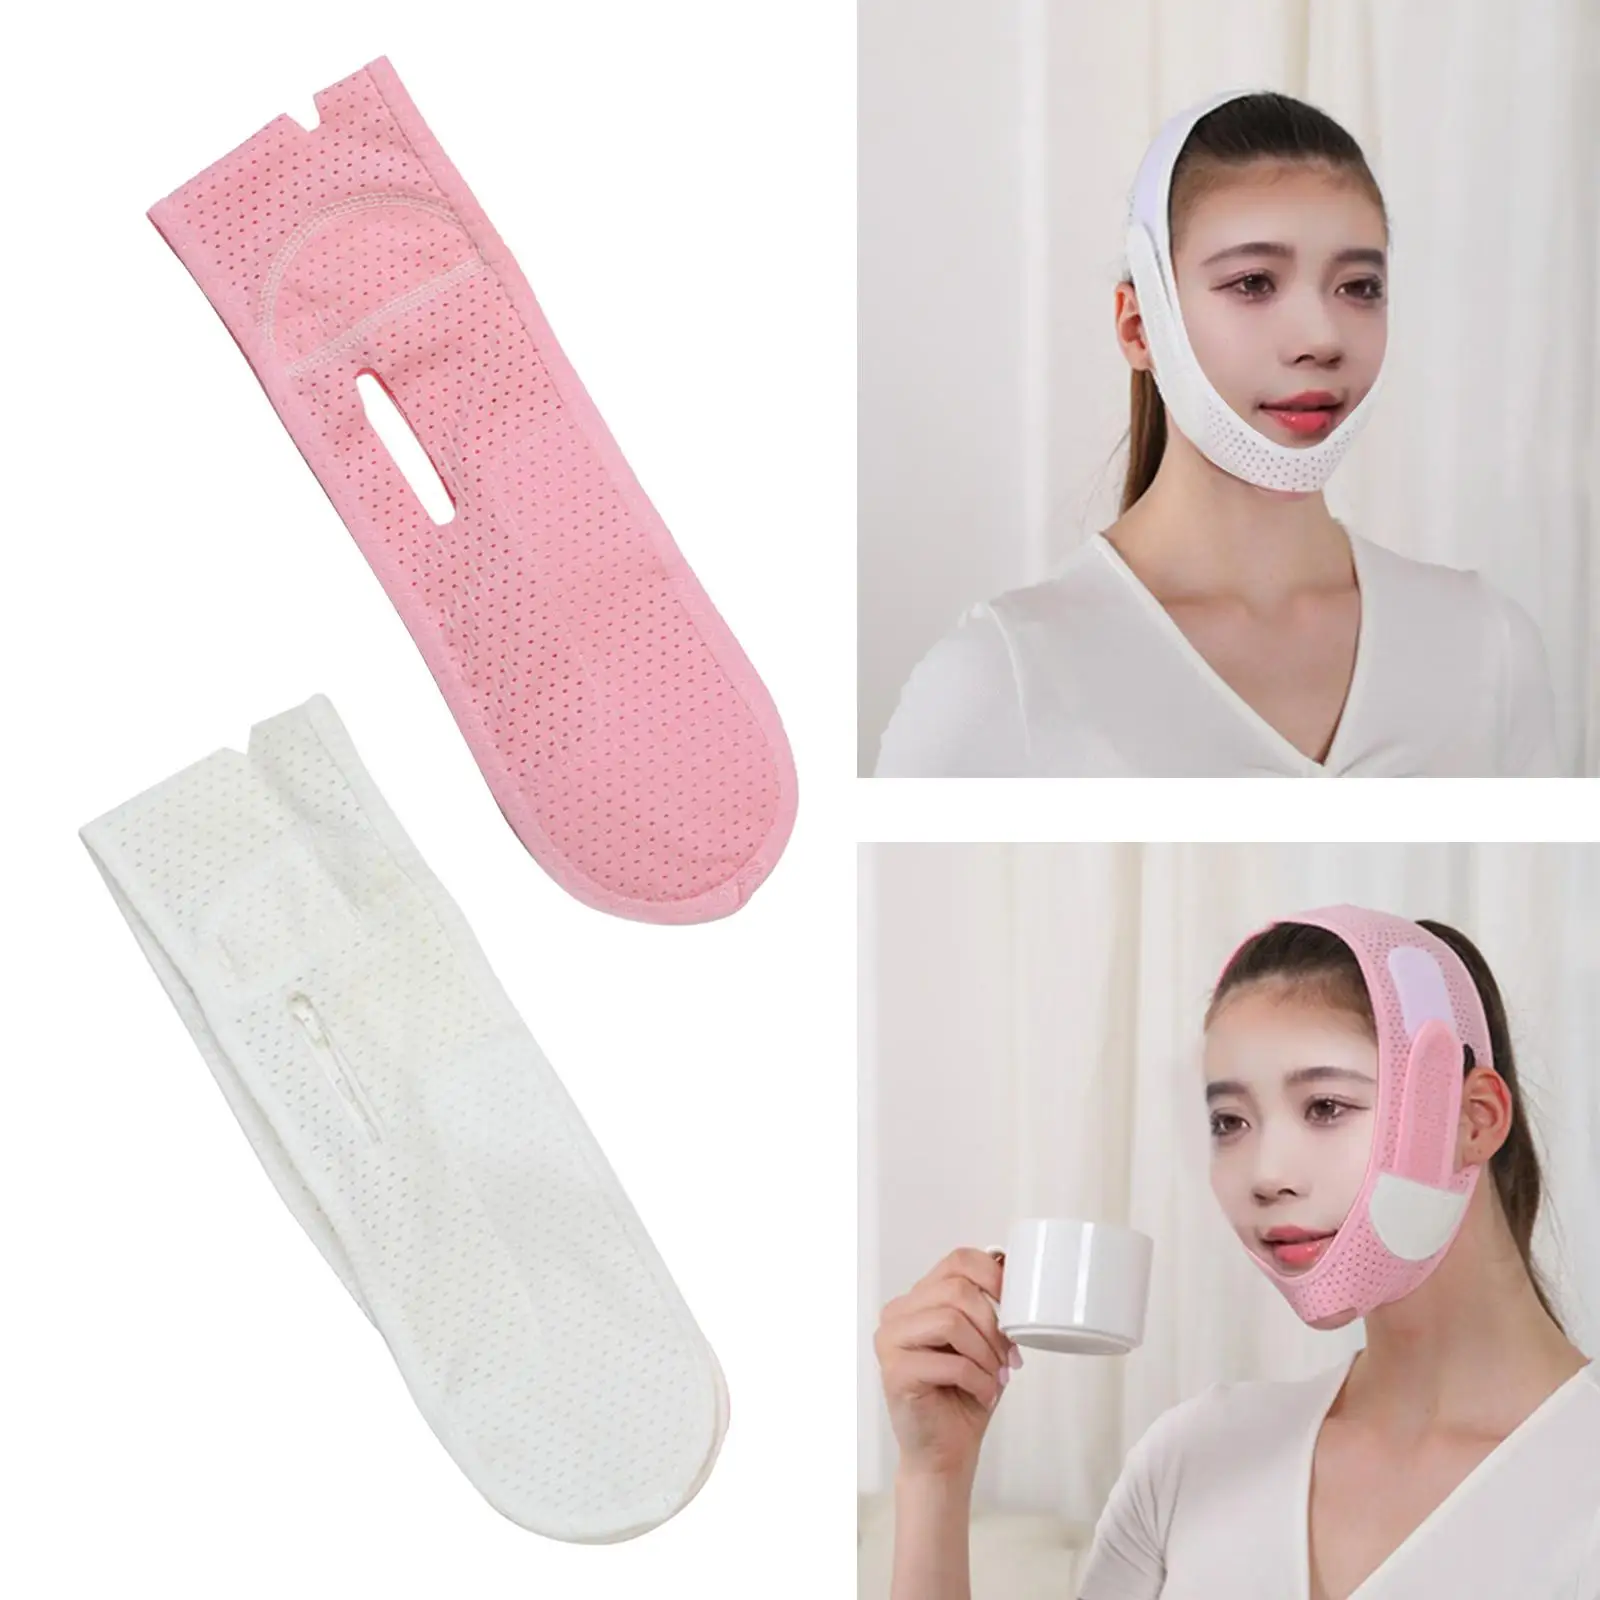 Reusable V Line Face Slimming Strap Jawline Shaper Contour Tightening Strap Patch for Firming Anti Aging